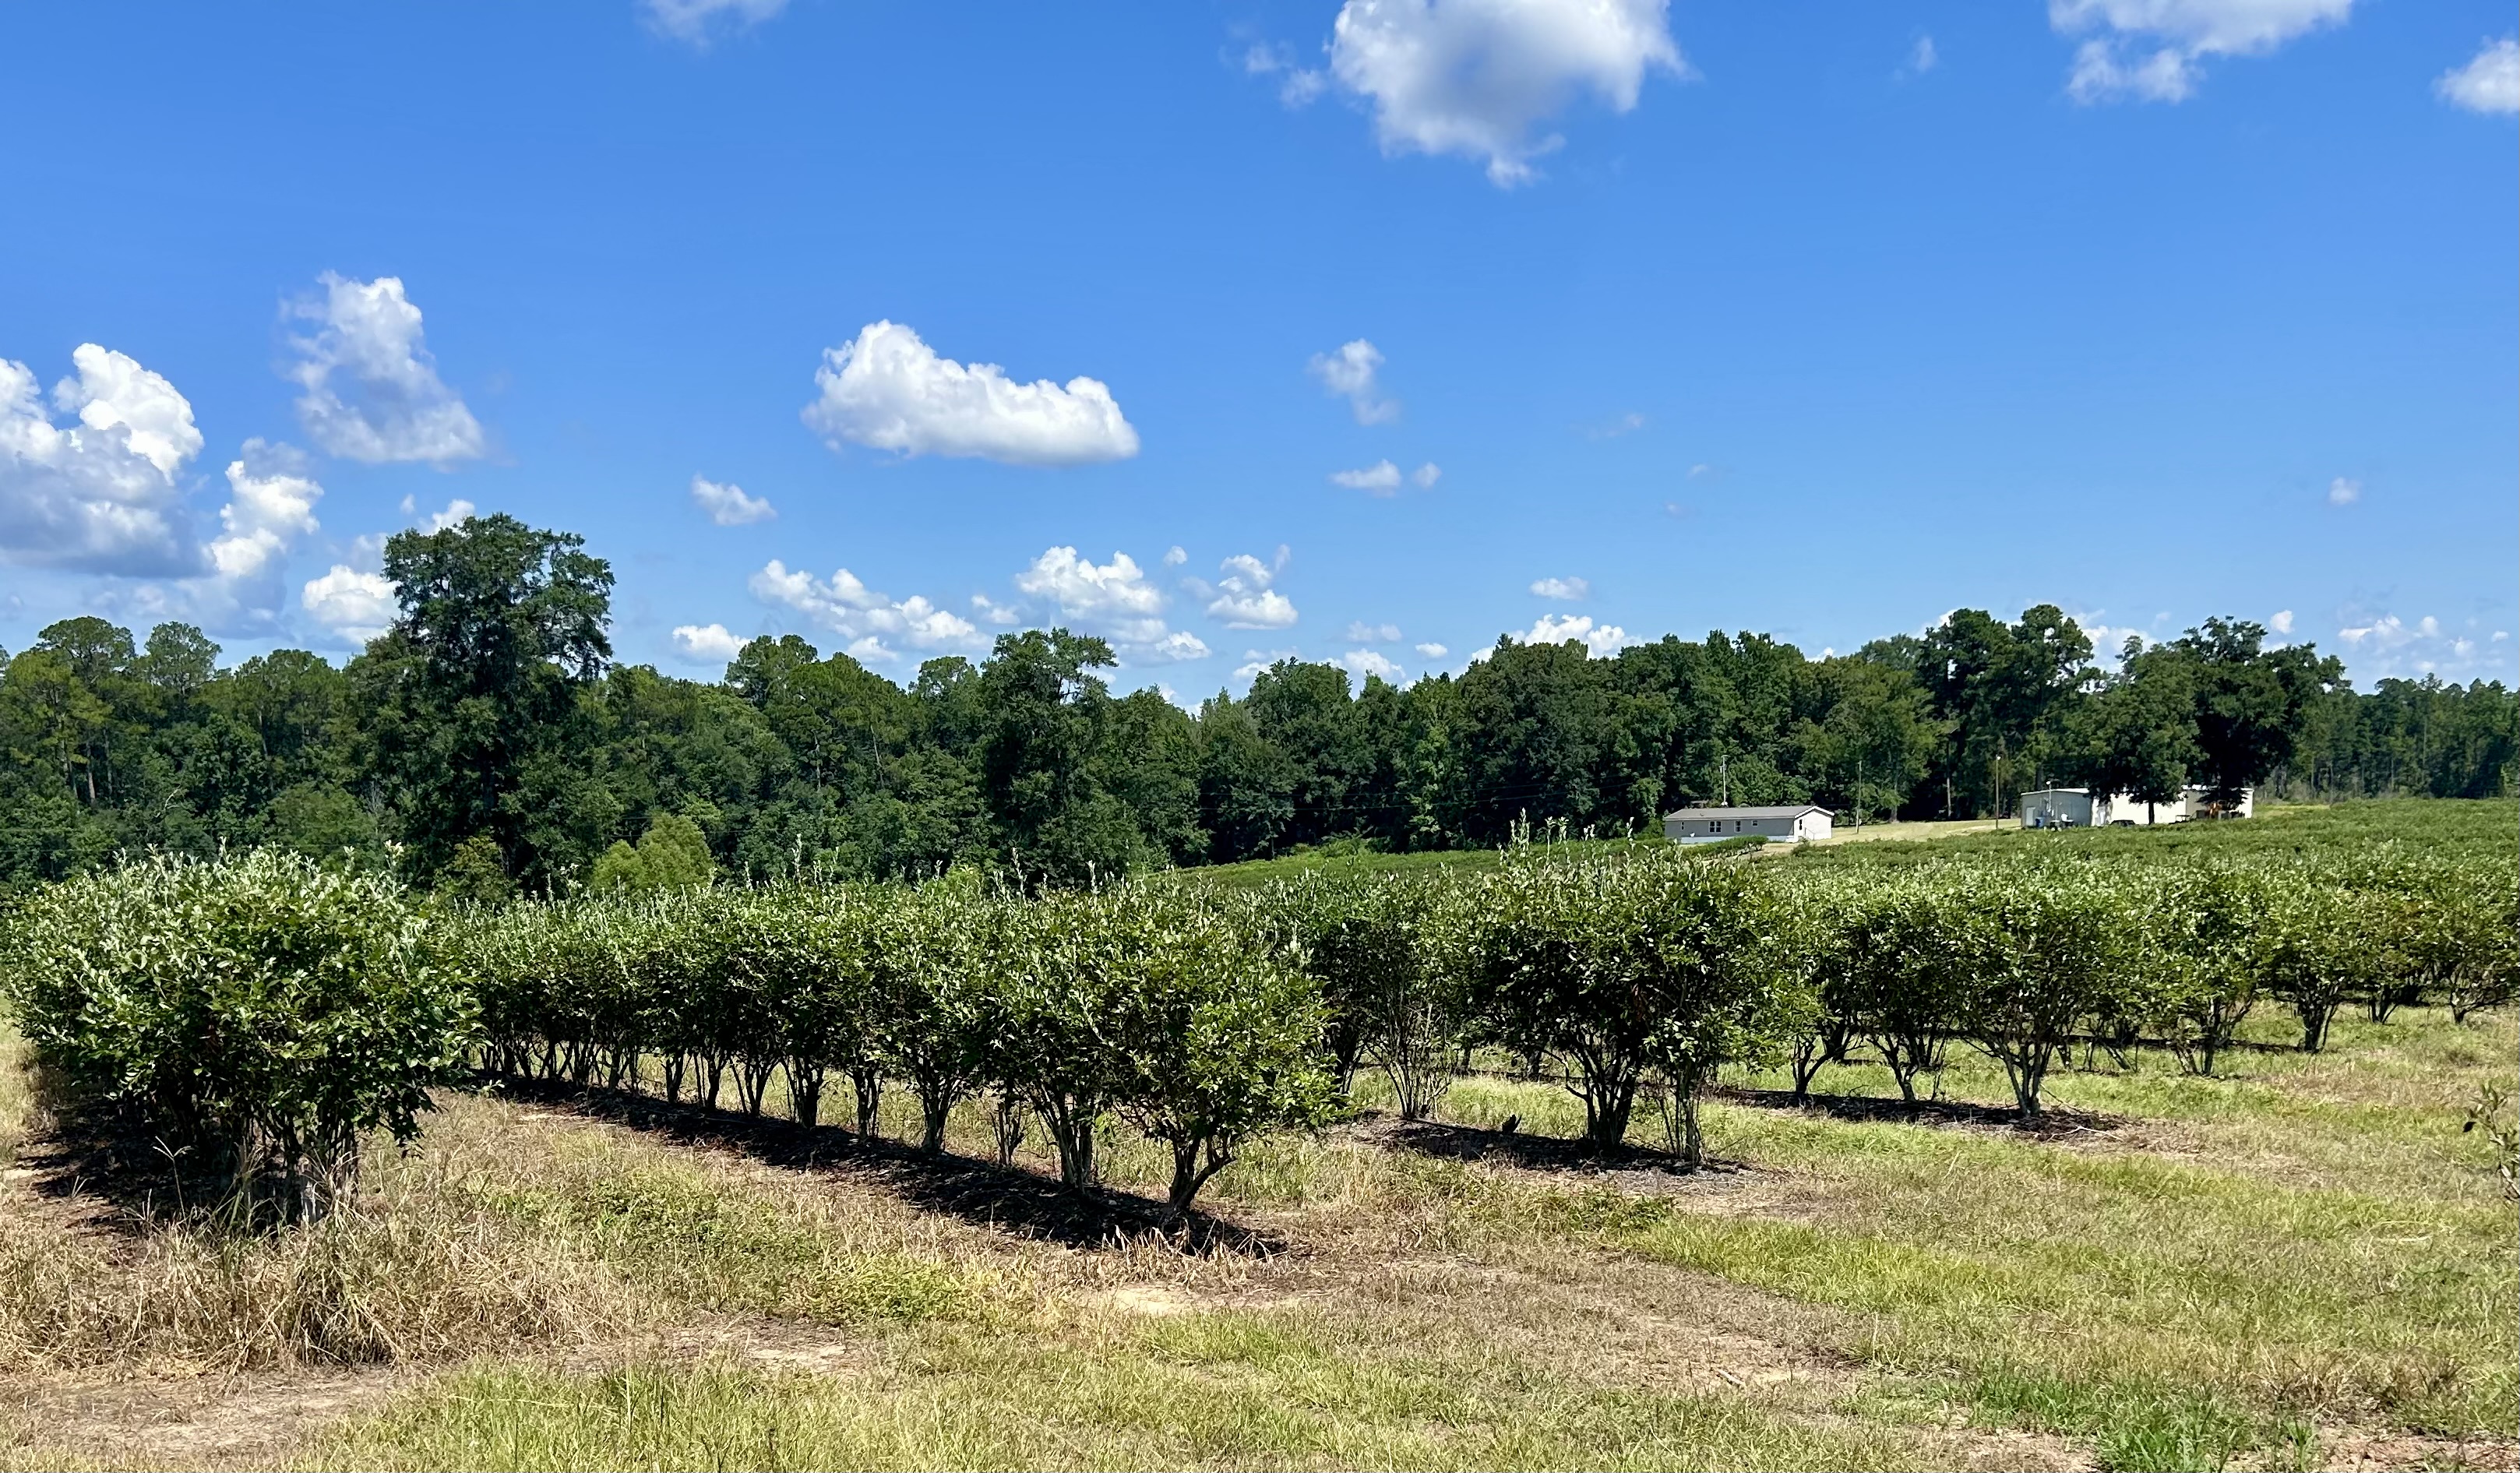 An estimated 20,000 blueberry bushes fill up 25 acres of the Washington County farm.